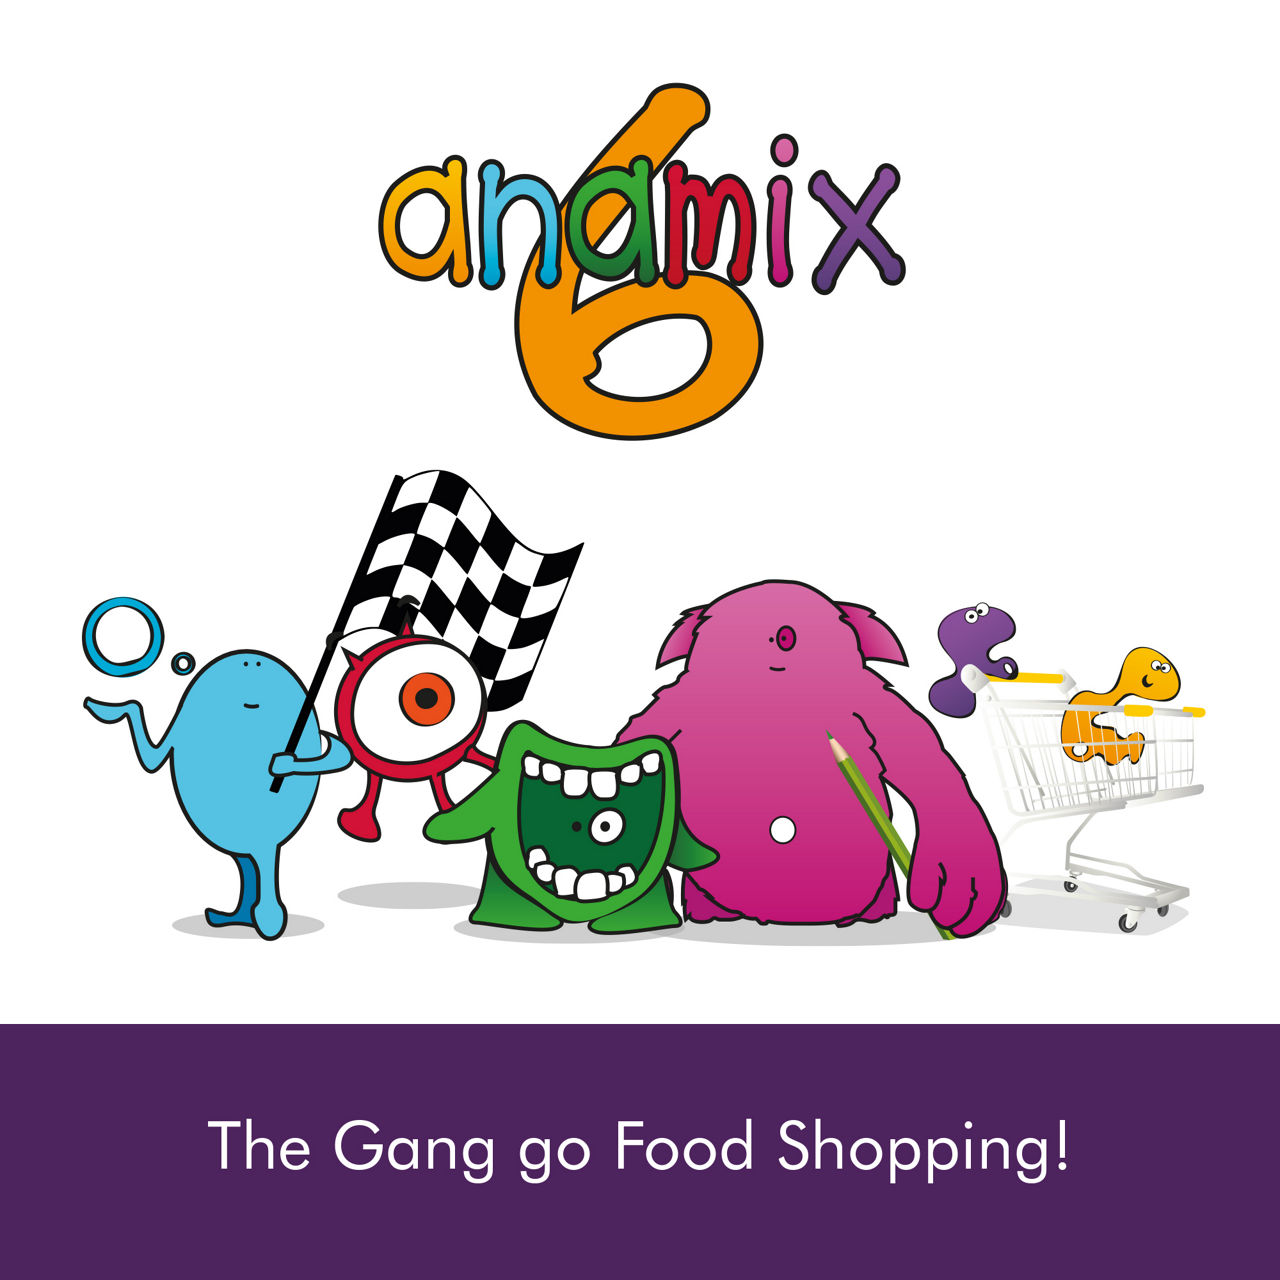 The Gang go Food Shopping!